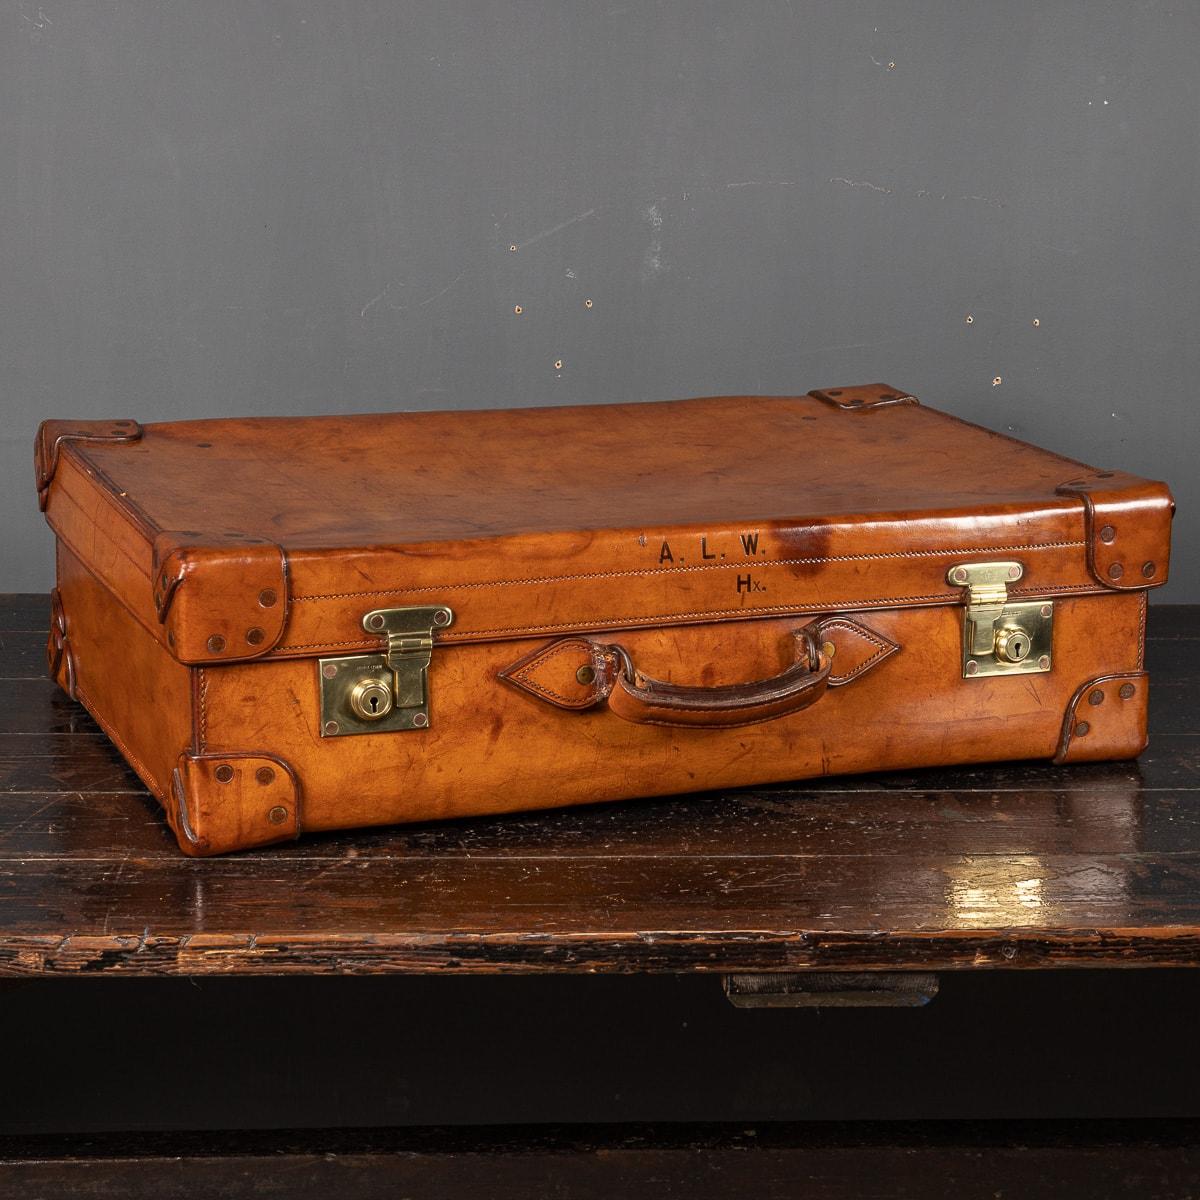 An English bridle hide dressing case with gilded silver accessories marked with the Walker and Hall stamp and a delicate engine turned pattern, including brushes, jars, mirror and document folder. This large case has original brass fittings and